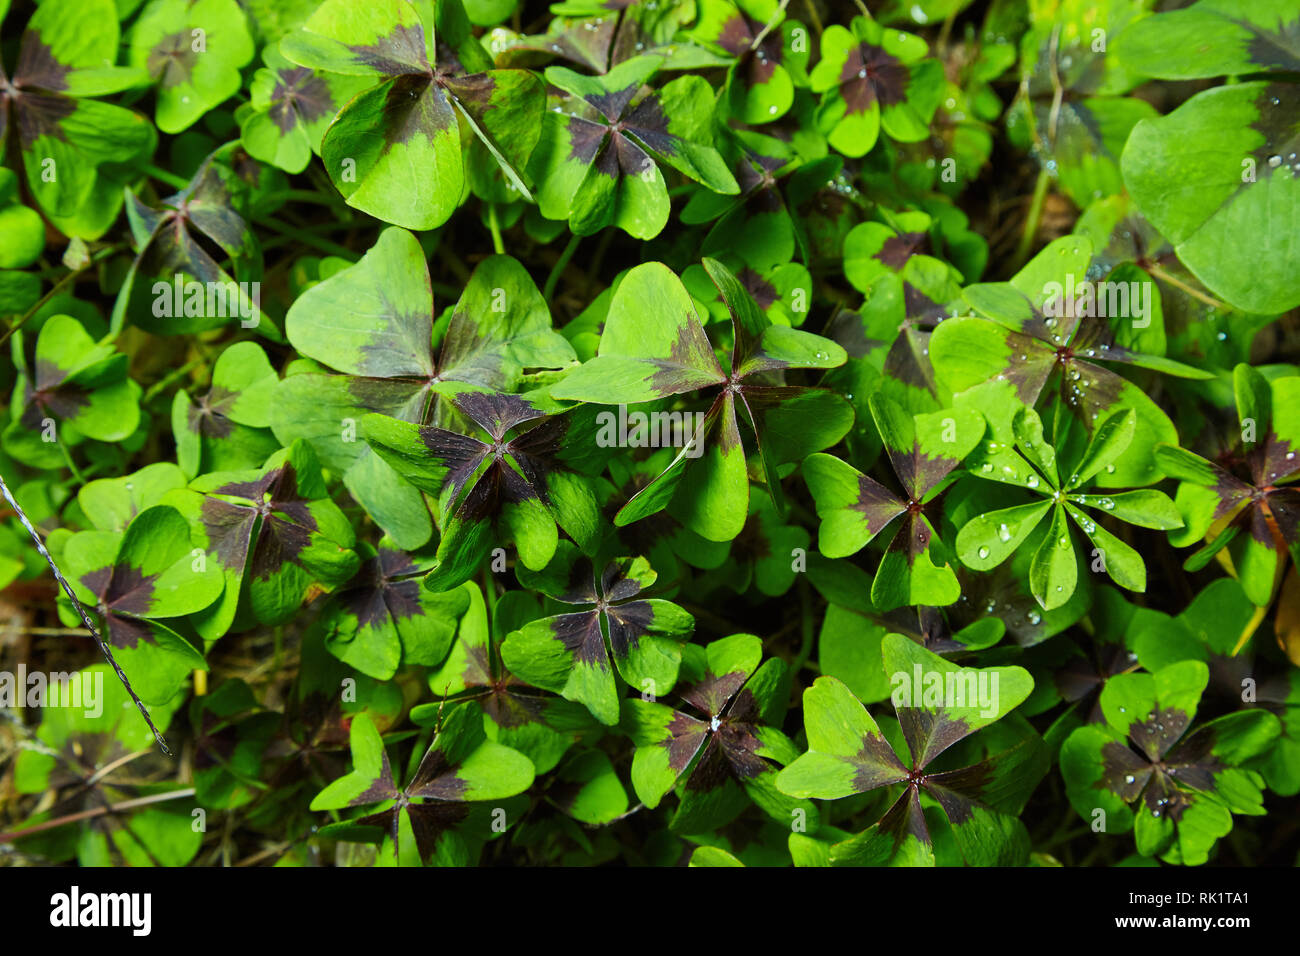 Leaves of the Oxalis Deppei plant (Oxalis tetraphylla). Natural background. Stock Photo